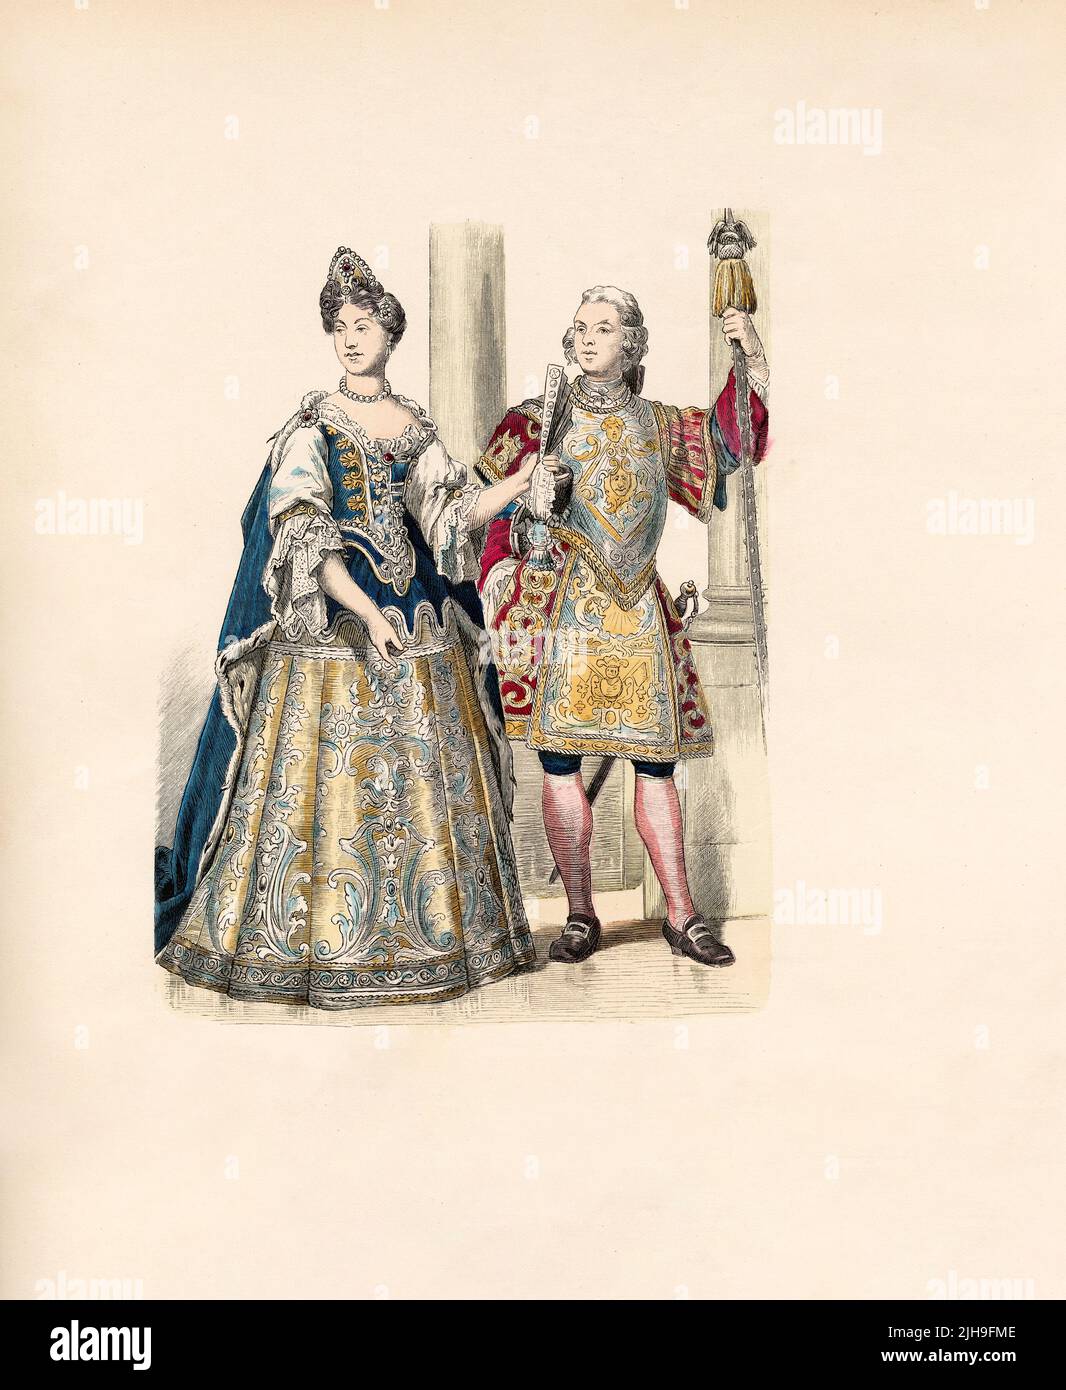 Francoise Marie de Bourbon, Duchess of Orleans (1702), Palace Guard of Louis XV of France (1724), Illustration, The History of Costume, Braun & Schneider, Munich, Germany, 1861-1880 Stock Photo